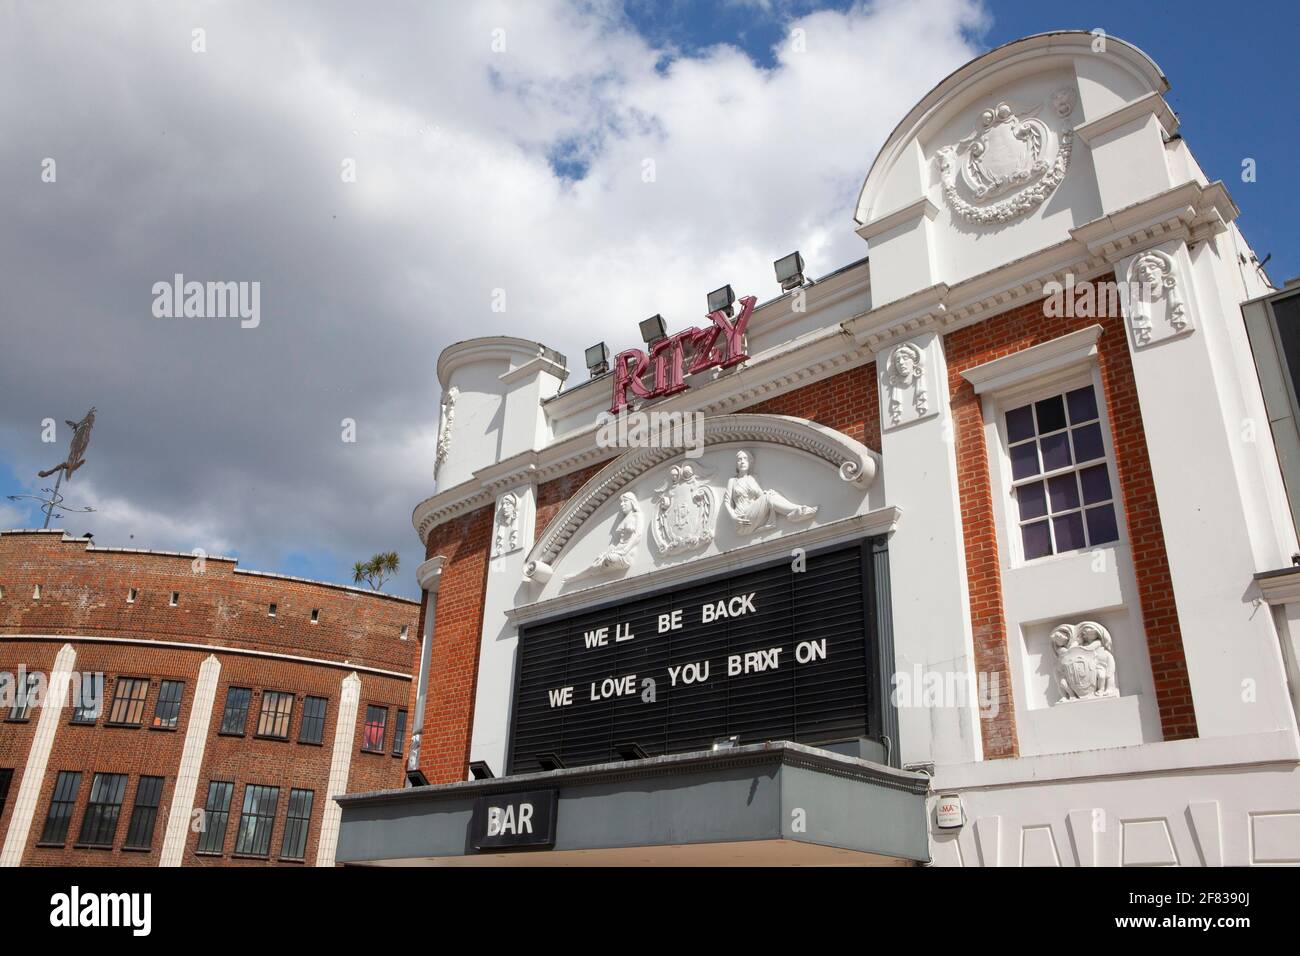 London, UK, 11 April 2021: In Brixton the Ritzy cinema remains shuttered as the lockdown easing won't allow indoor entertainments to reopen before 17 May at earliest. Anna Watson/Alamy Live News Stock Photo